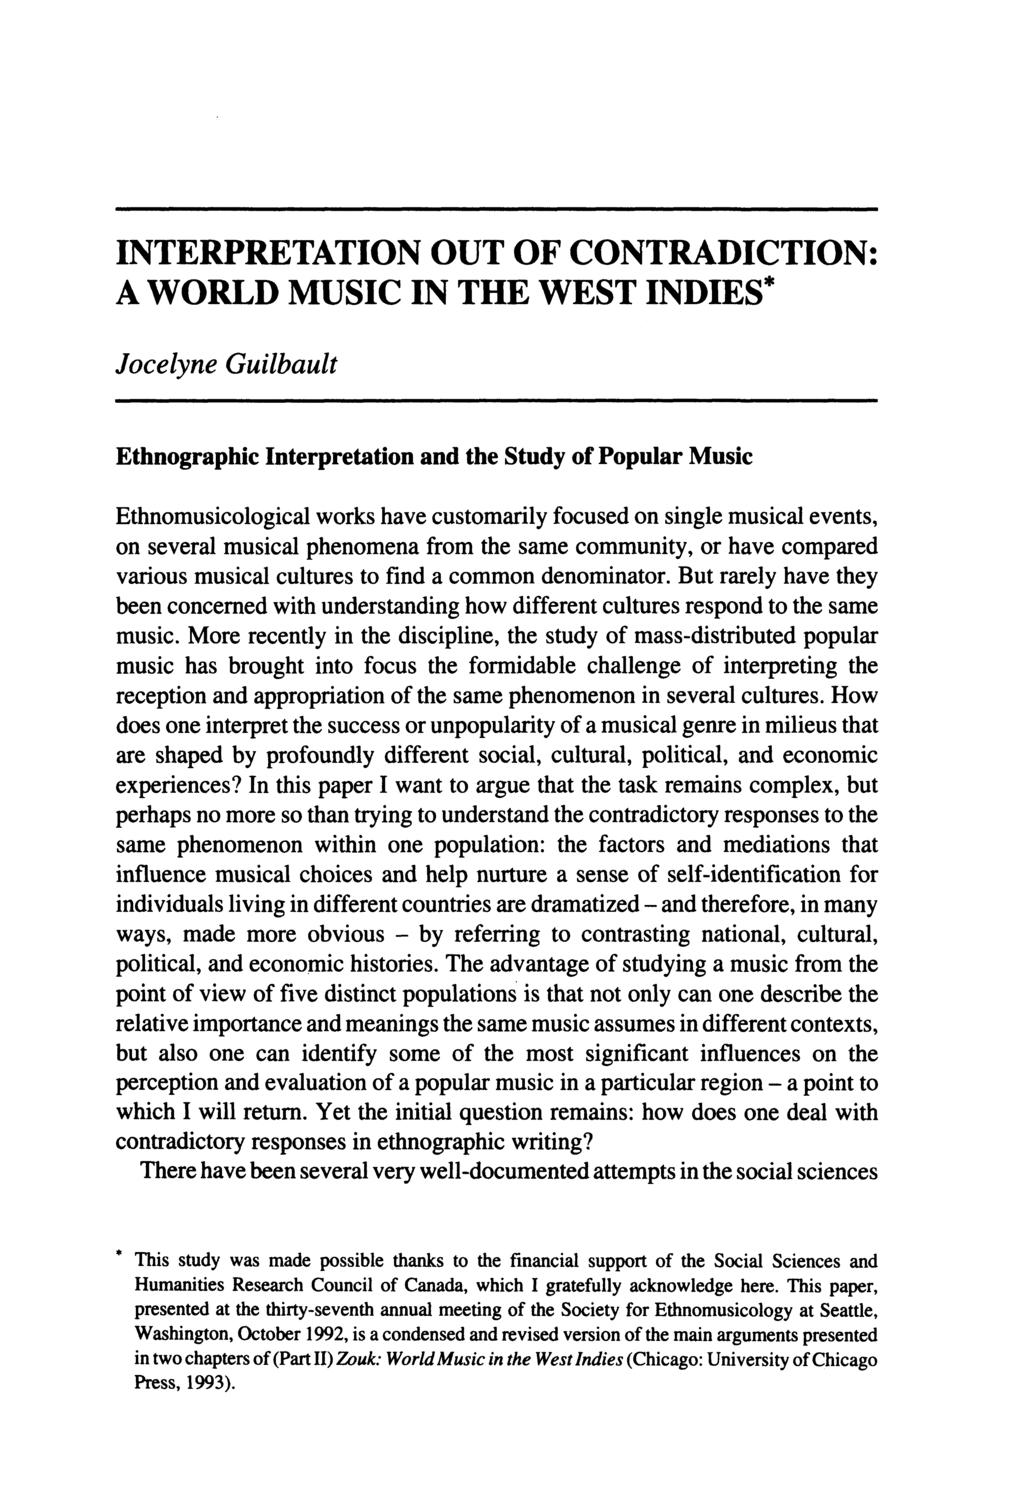 INTERPRETATION OUT OF CONTRADICTION: A WORLD MUSIC IN THE WEST INDIES* Jocelyne Guilbault Ethnographic Interpretation and the Study of Popular Music Ethnomusicological works have customarily focused